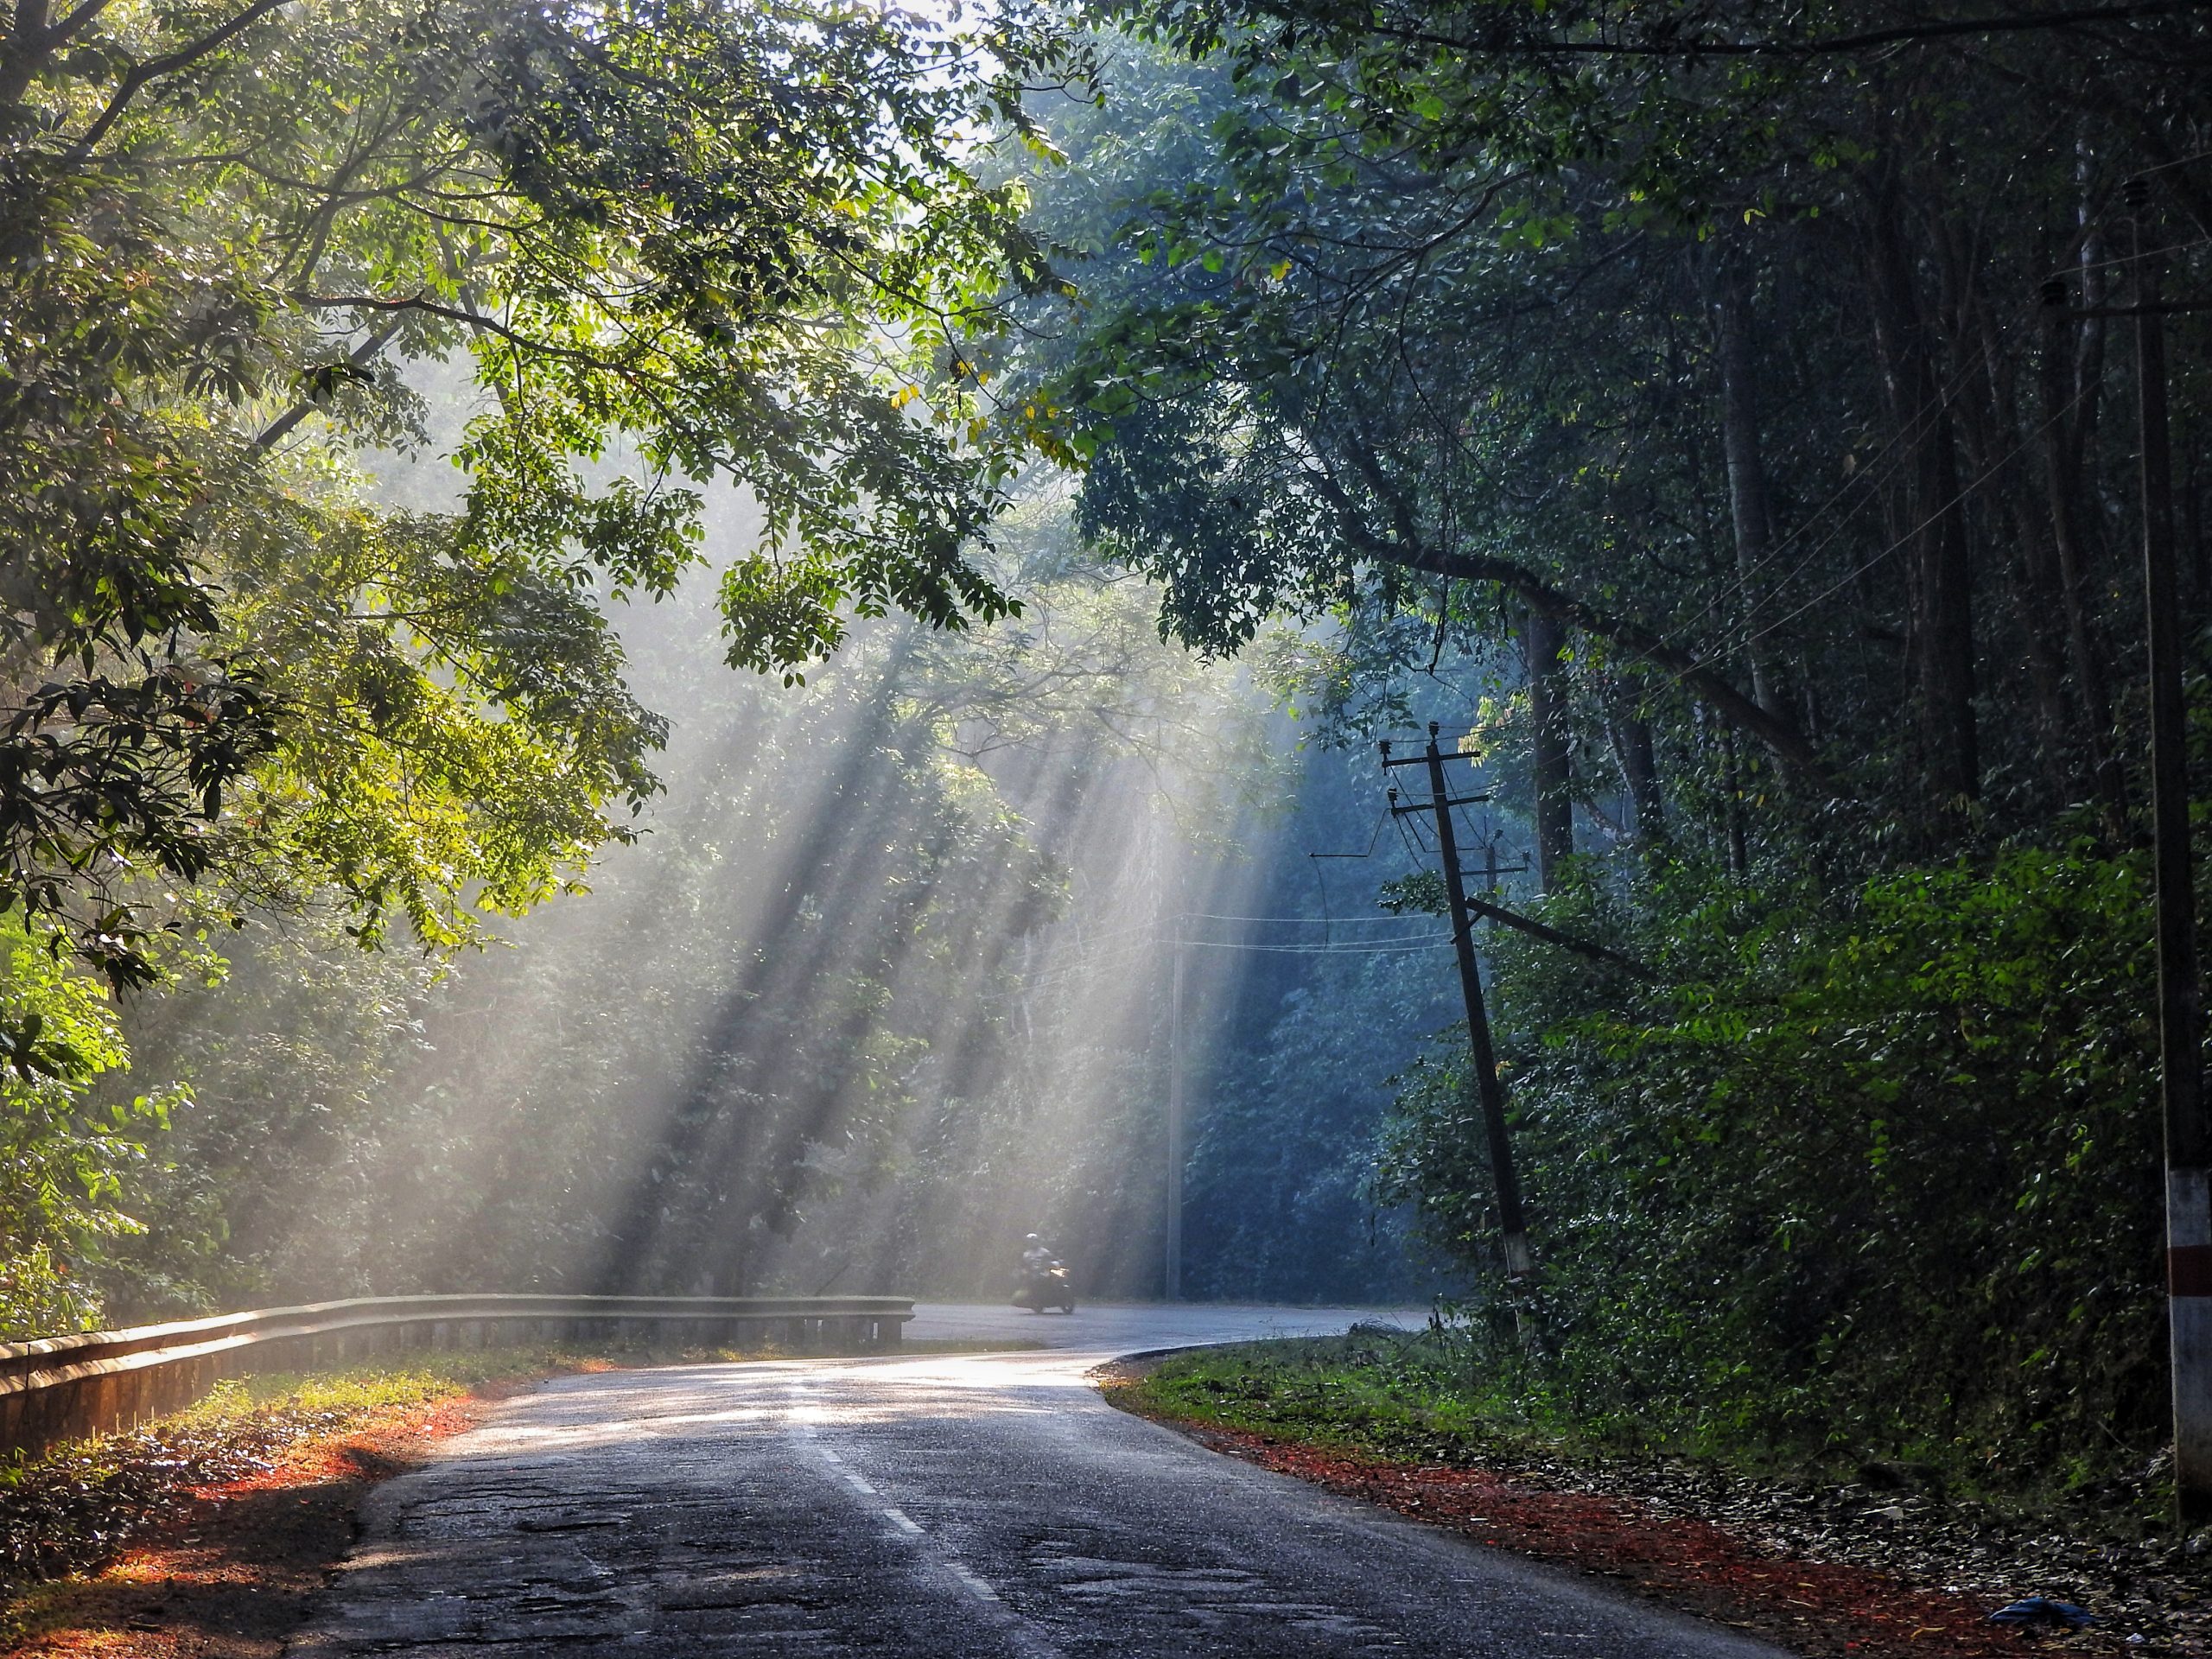 sun rays on a road